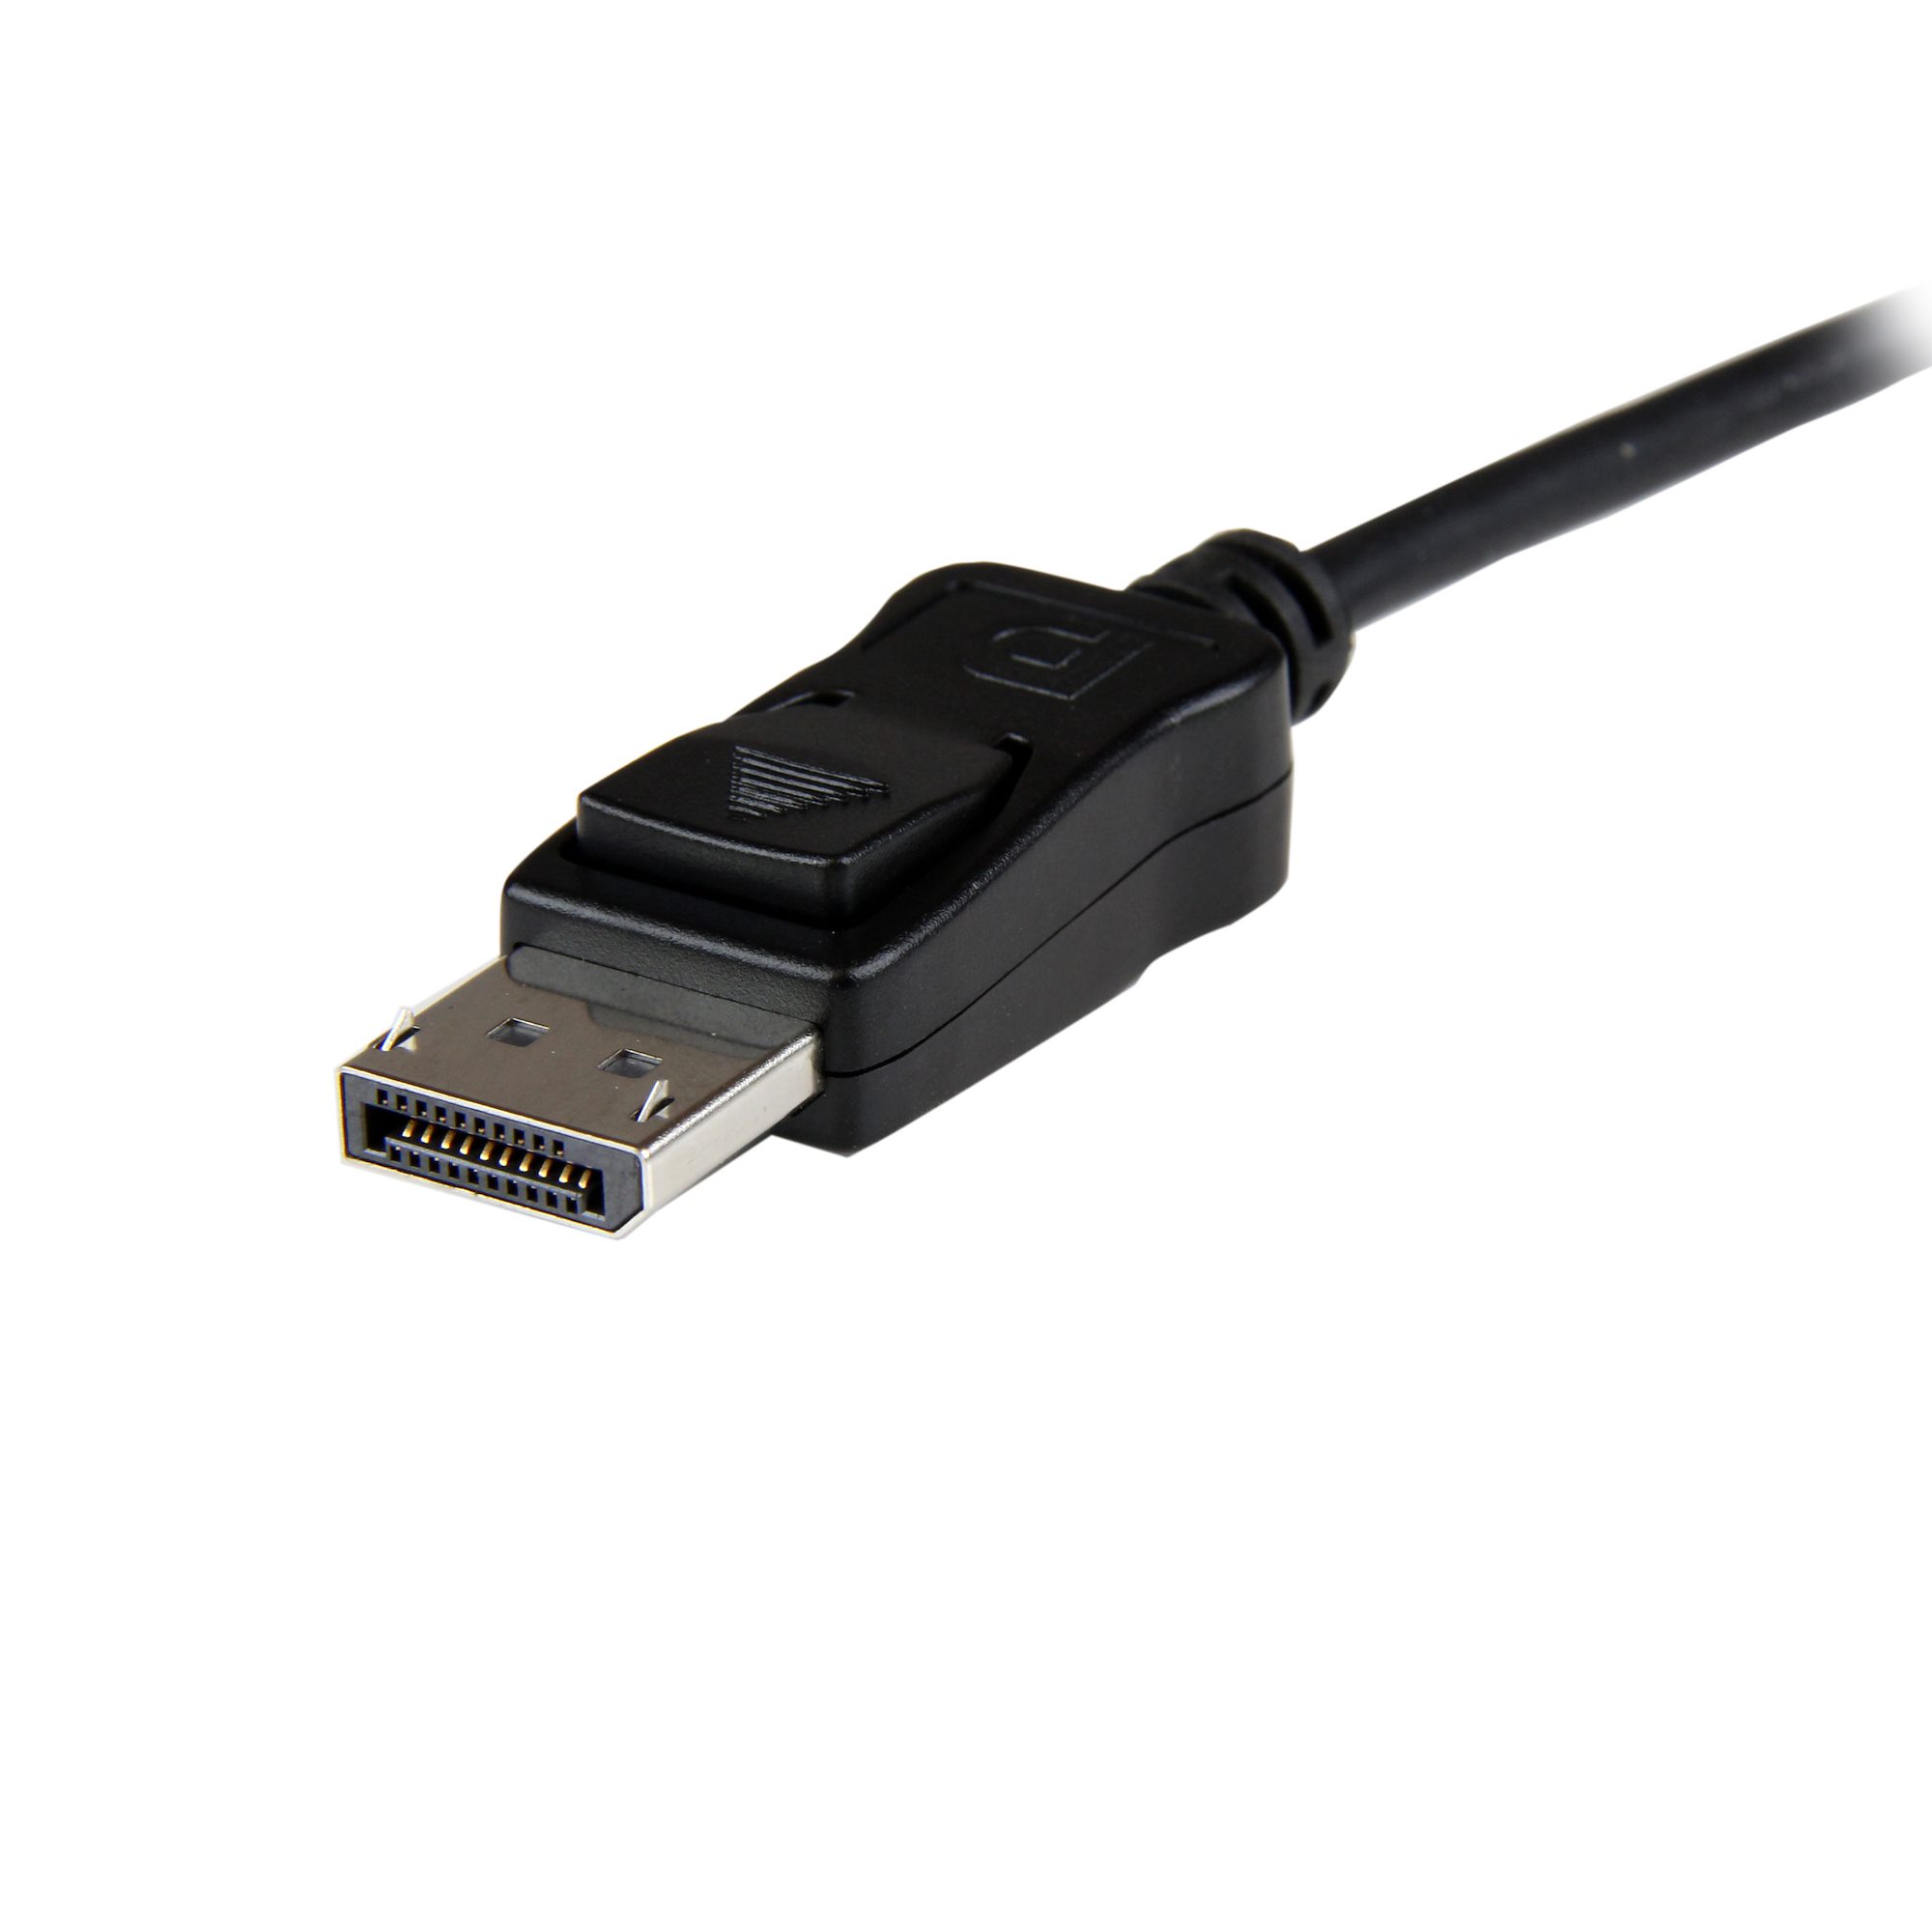 DisplayPort to DVI Dual Link Active Adapter - DisplayPort to DVI-D Adapter  Video Converter 2560x1600 60Hz - DP 1.2 to DVI Monitor - USB Powered -